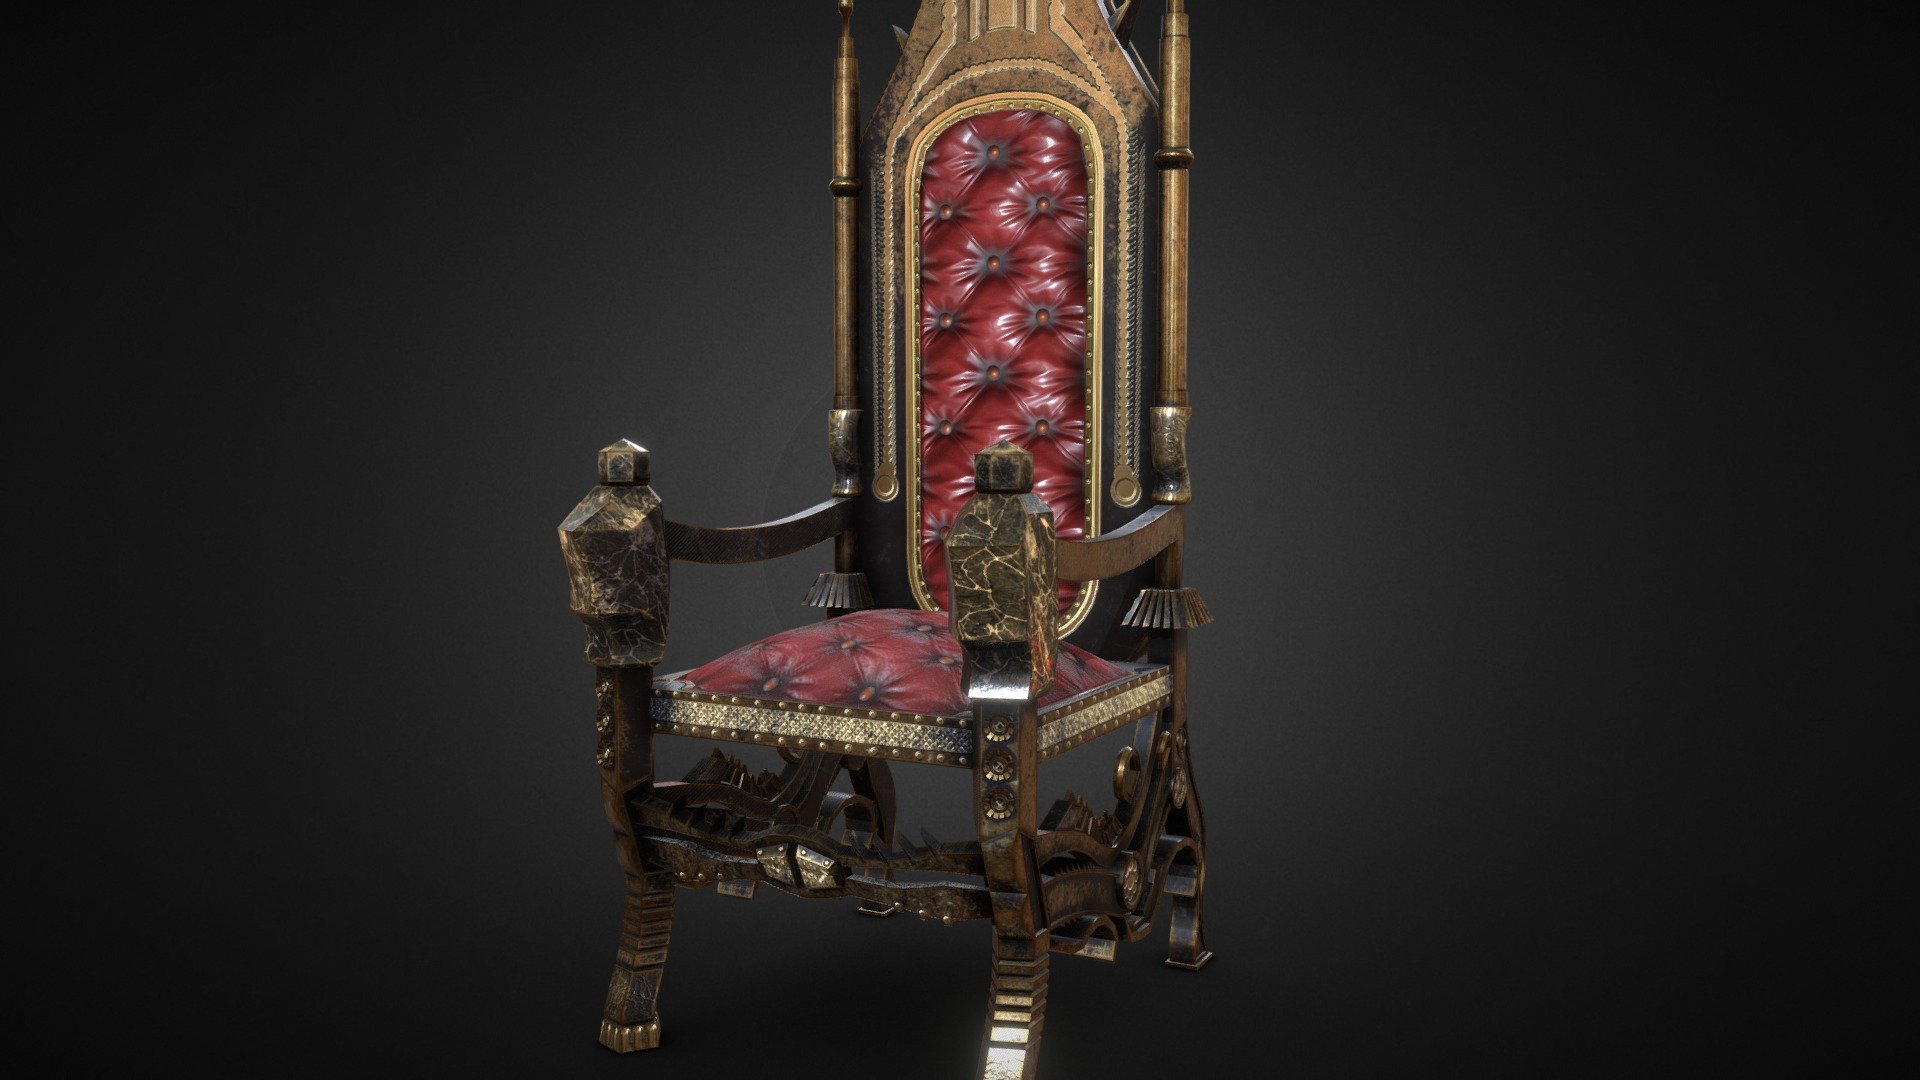 Medieval Chair.

1) THE MODEL CONSISTS OF:




5647 Polys;

12024 Tris;

11928 Edges;

6324 Verts;

4K and 1K Textures (AlbedoM, NormalM, RoughnessM, MetalM);

2) FILE PROPERTIES:




Version: 2010 (Only .DXF), 2011 (.FBX and .DWG), 2013;

Render: V-Ray 5.10.03 &amp; IRay (Substance Painter, Preview);

Formats: .FBX, 3DS, .ABC, .ASE, .DAE, .DWF, .DWG, .DXF, .OBJ, .STL, .W3D;

3) ADDITIONAL INFORMATION:

Software used:




3D modeling: 3ds Max 2016;

UV Mapping: RizomUV;

Painting / Texturing: Substance Painter &amp; Photoshop CS6;

My system specifications:




CPU: Intel Core i7 4770k 3.5GHz;

GPU: GeForce GTX 760 2GB;

RAM: DDR3 8GB;

OS: Windows 10;

If you want to use High-Q (4096x and more) textures instead of Low-Q textures (1024x and more), download the ZIP-file with the HQ-textures and simply replace the LQ-texture files.
Whole scene setuped and fully ready to render in Vray. All materials setuped in Vray.
I wish you happiness and health! - C2 - Medieval Chair 1 - 3D model by jordnu 3d model